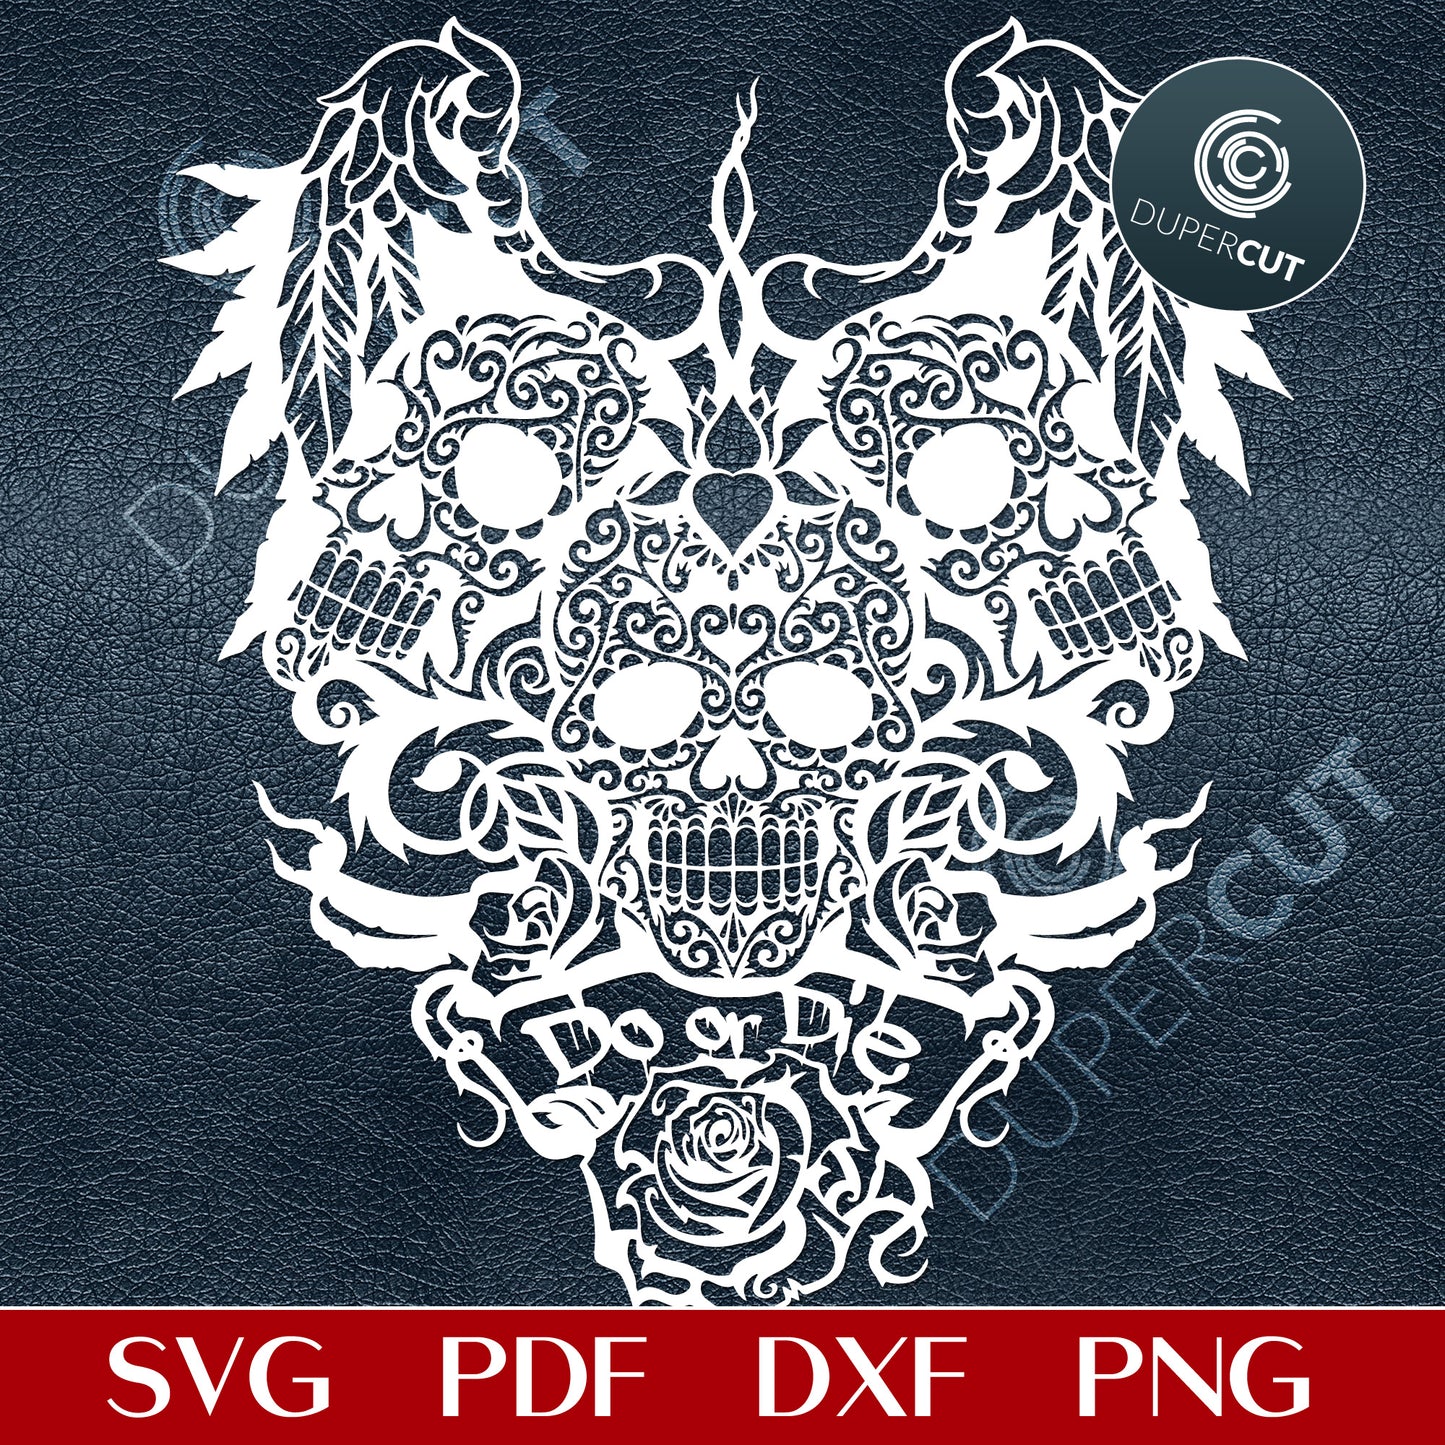 Winged skulls steampunk line art design. SVG PNG DXF cutting files for Glowforge, Cricut, Silhouette cameo, laser engraving.